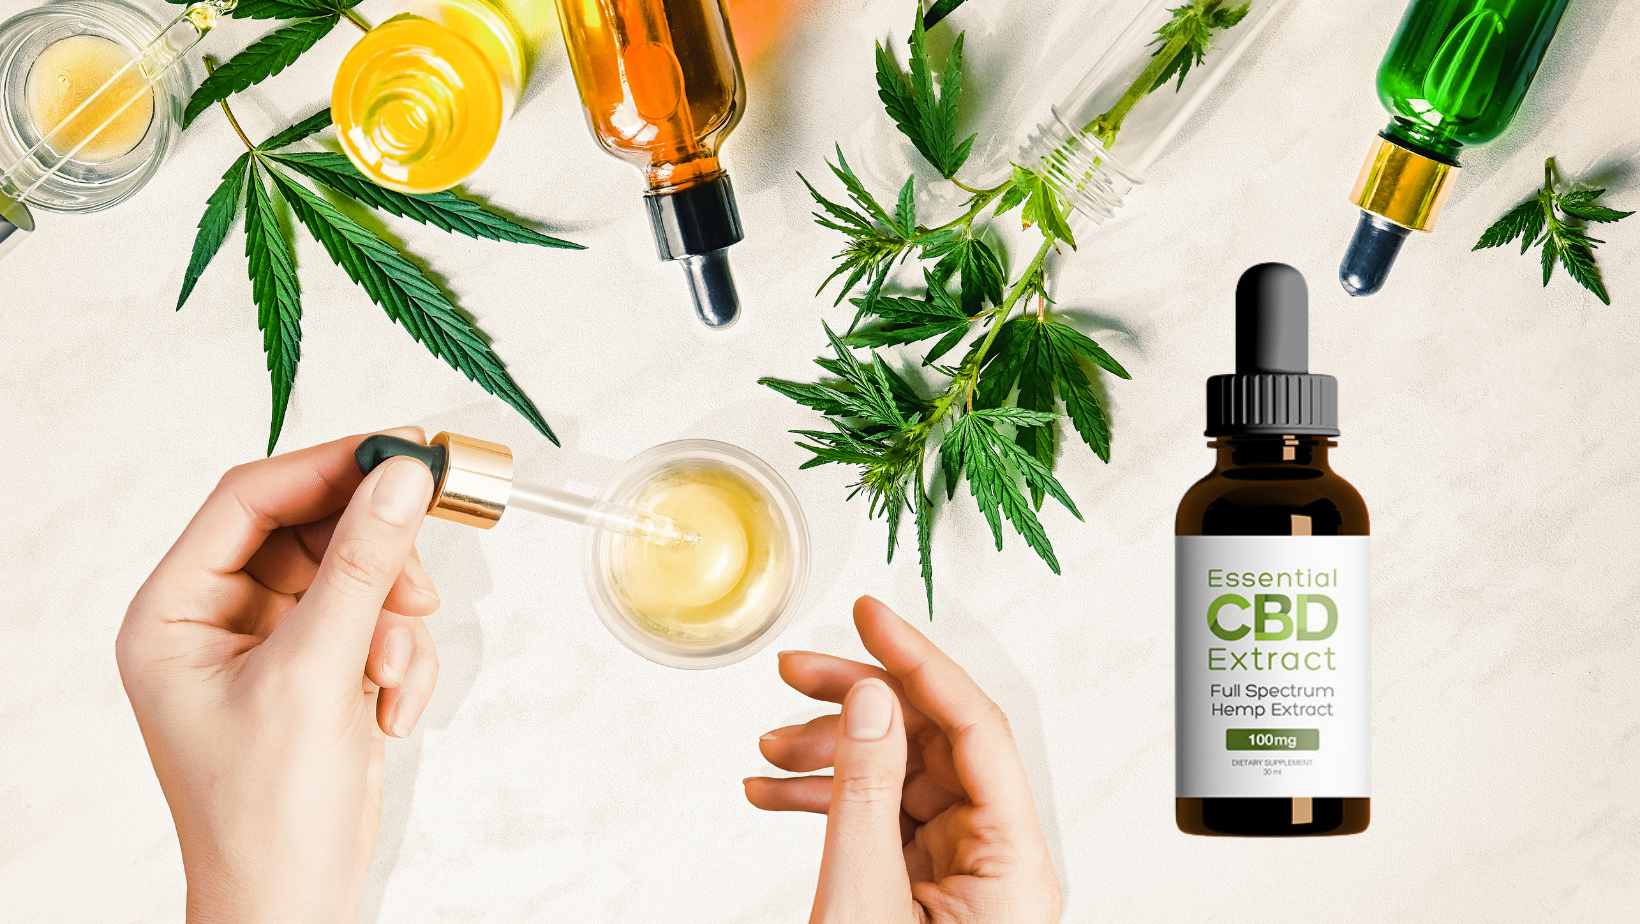 Cover Image of Essential CBD Extract